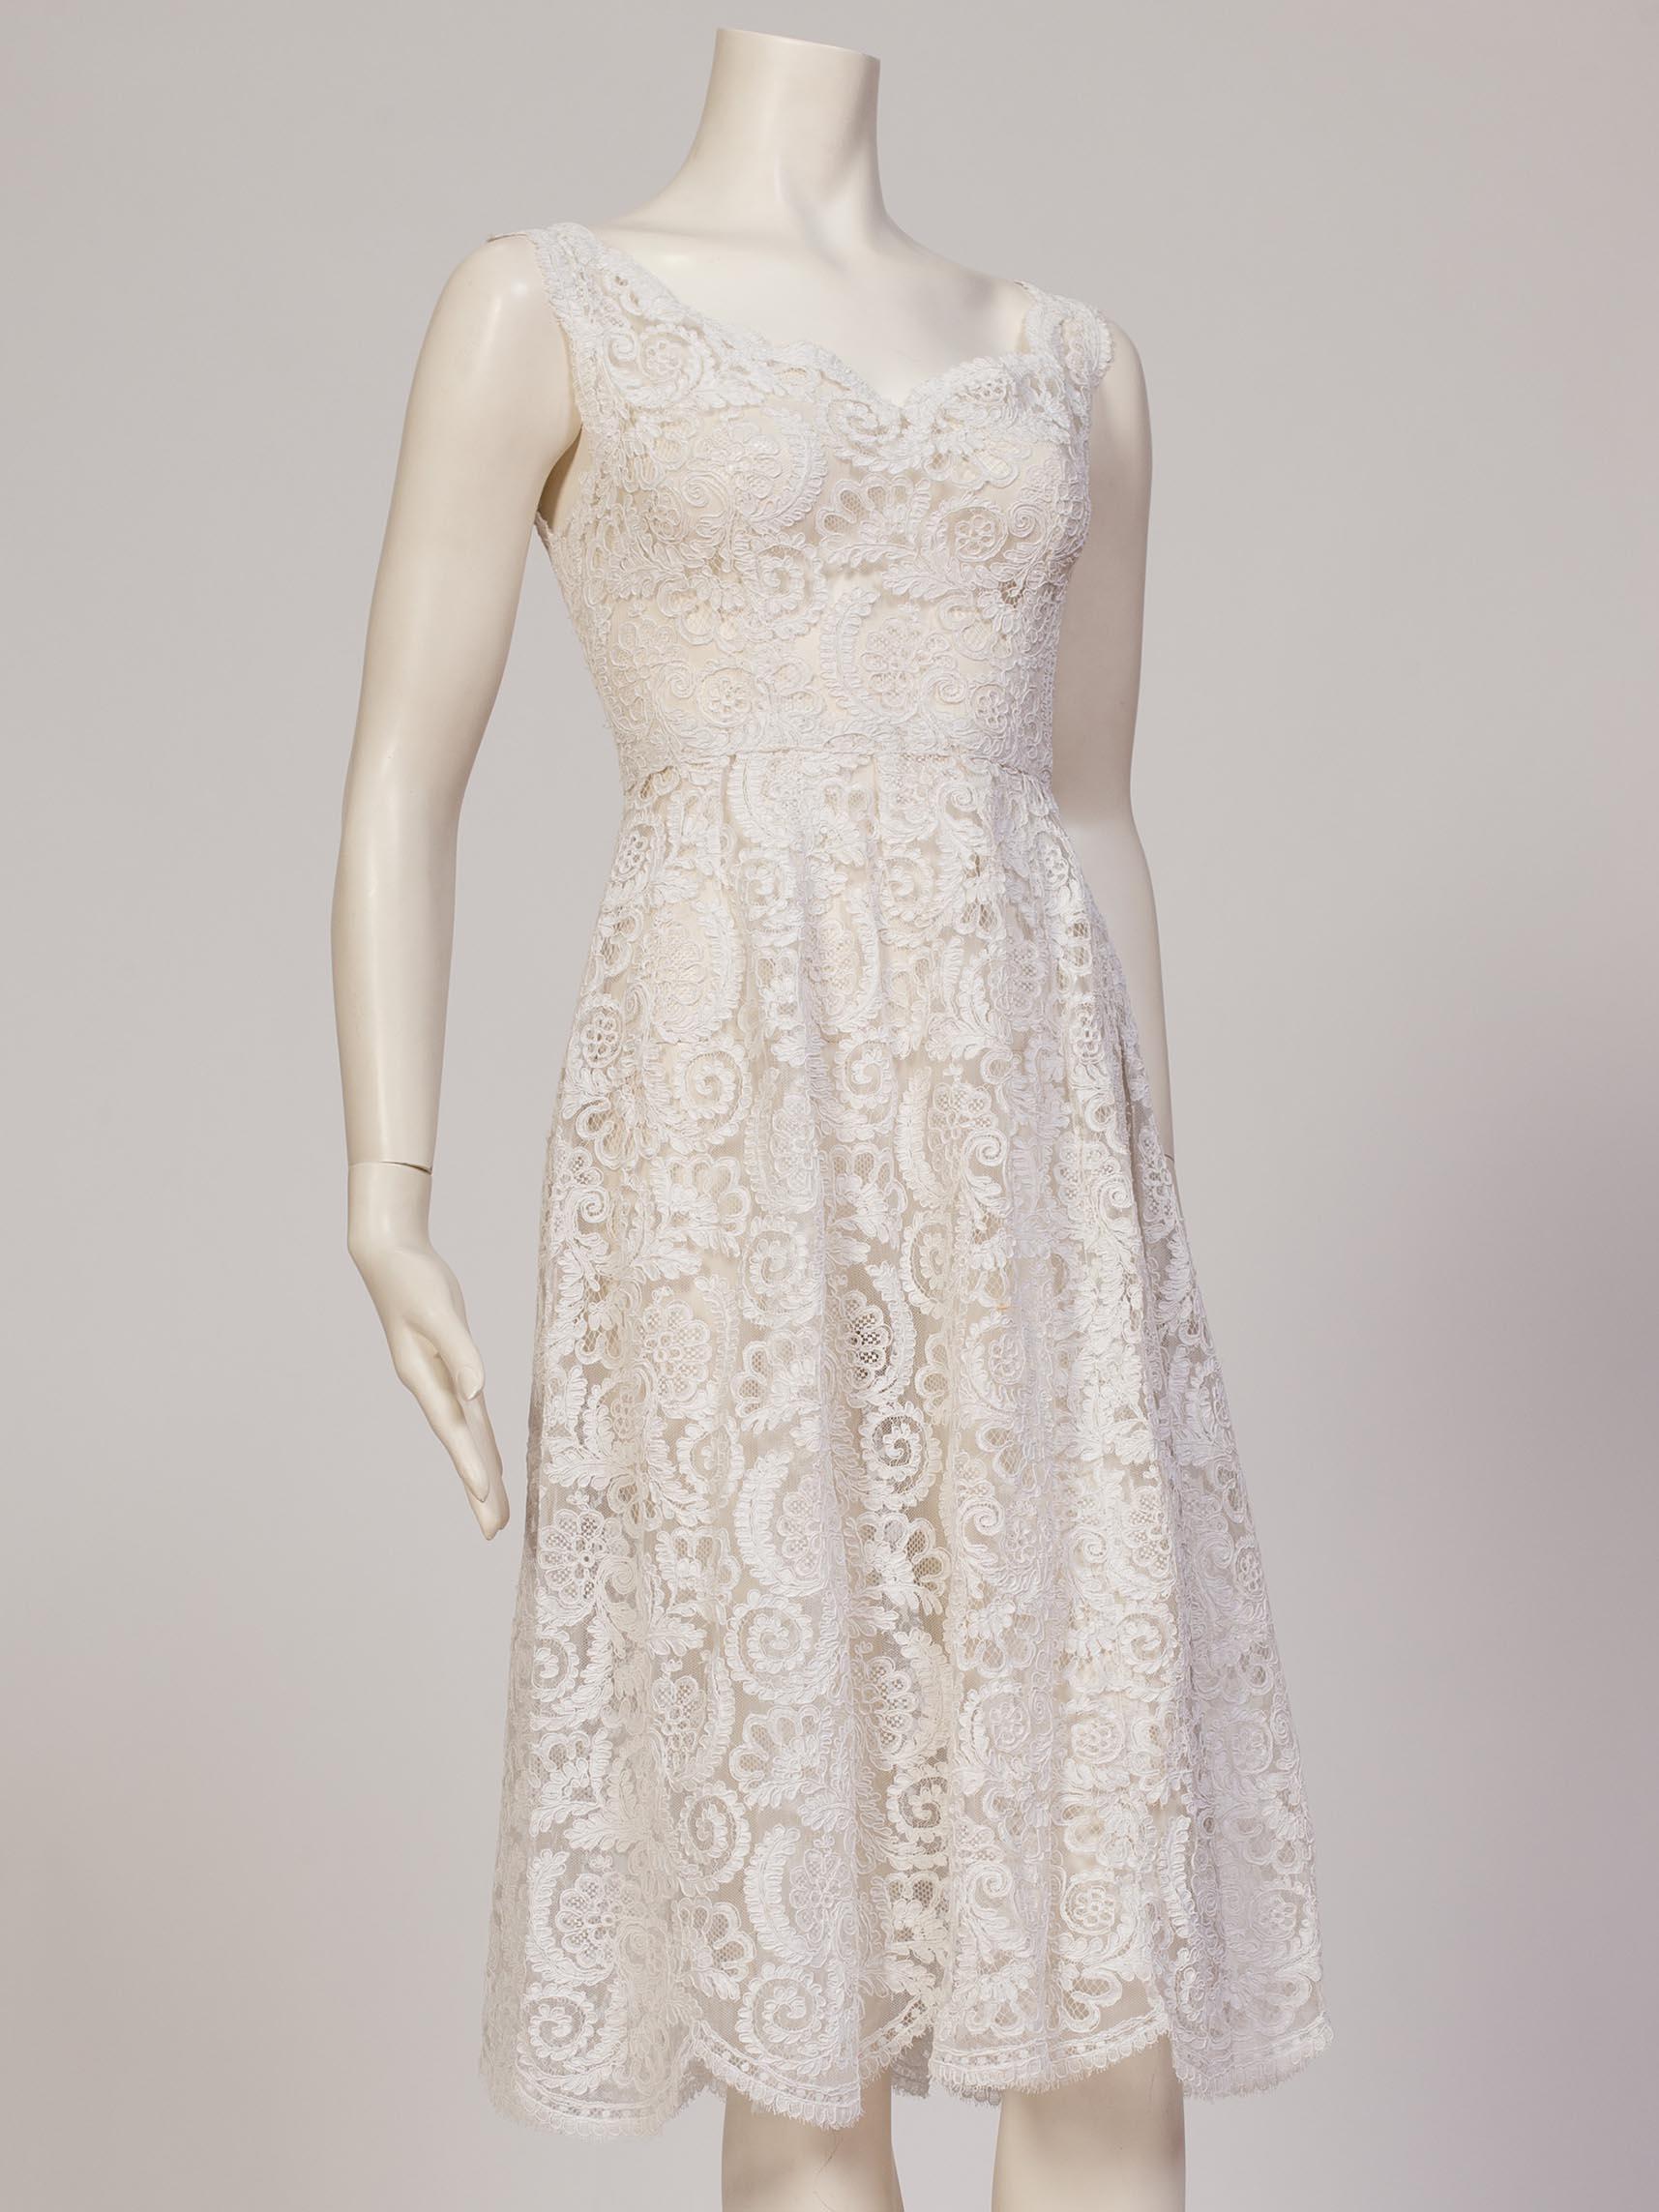 Women's 1950S White Couture Grade Lace Dress With Exceptional Hand Finishing